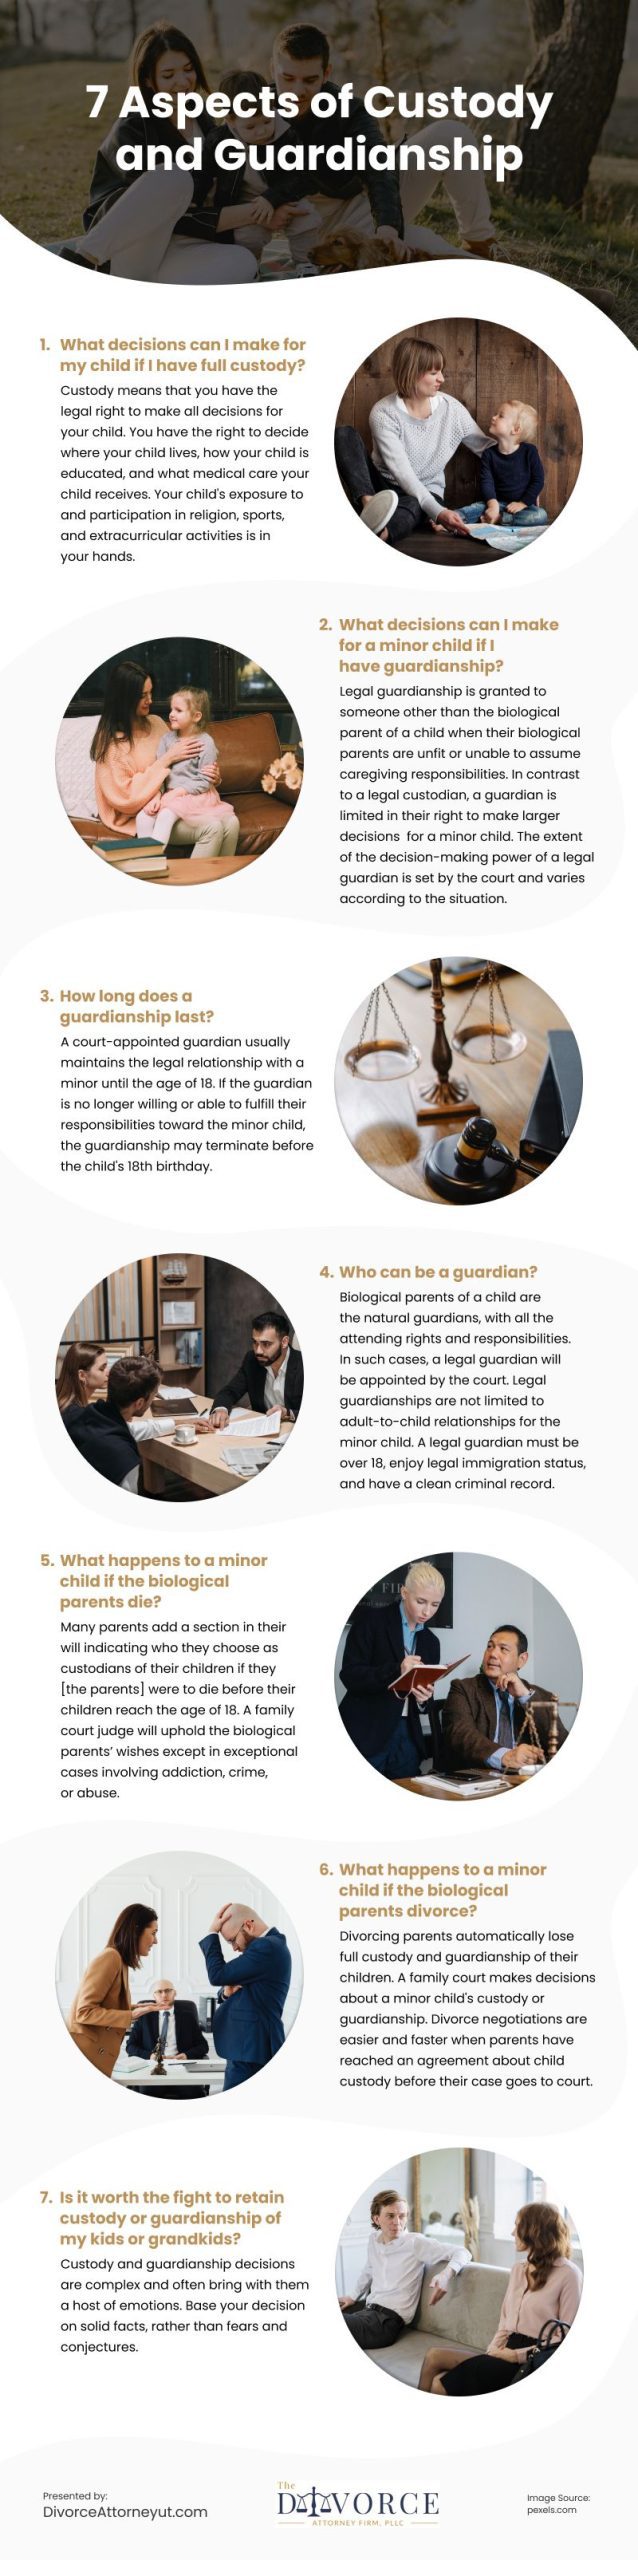 7 Aspects of Custody and Guardianship Infographic